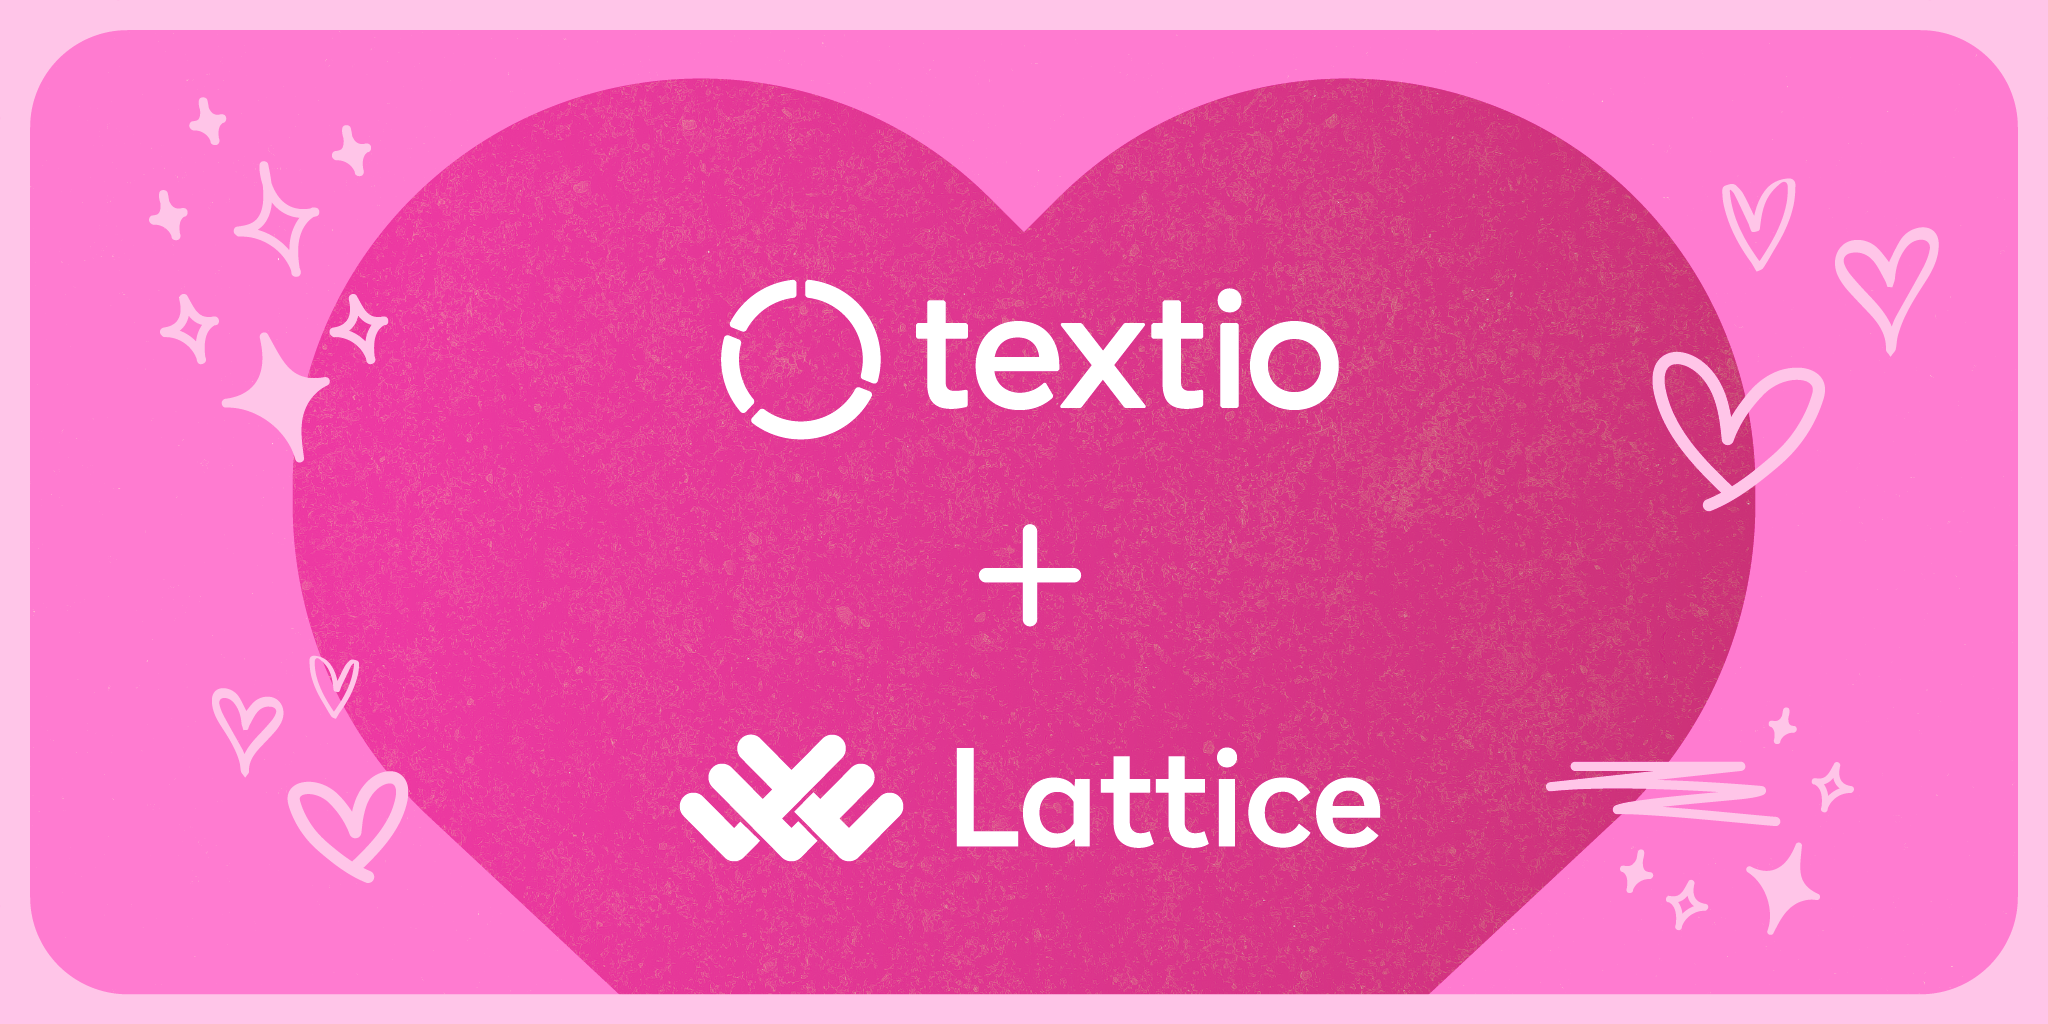 Textio Lift helps managers write better feedback in Lattice, where they